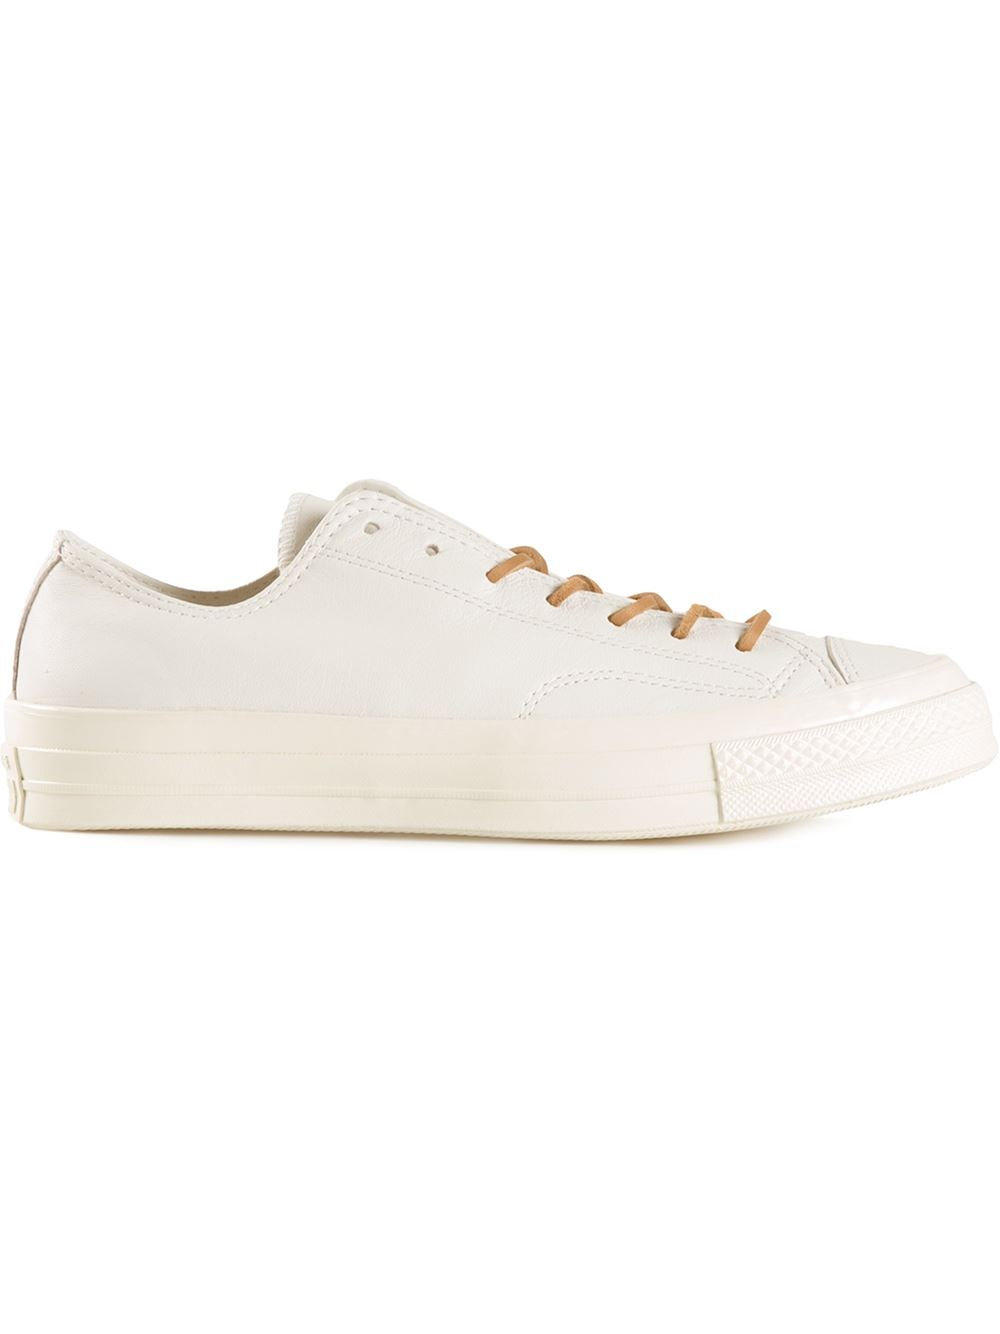 Converse Thick-Soled Sneakers in White for Men | Lyst